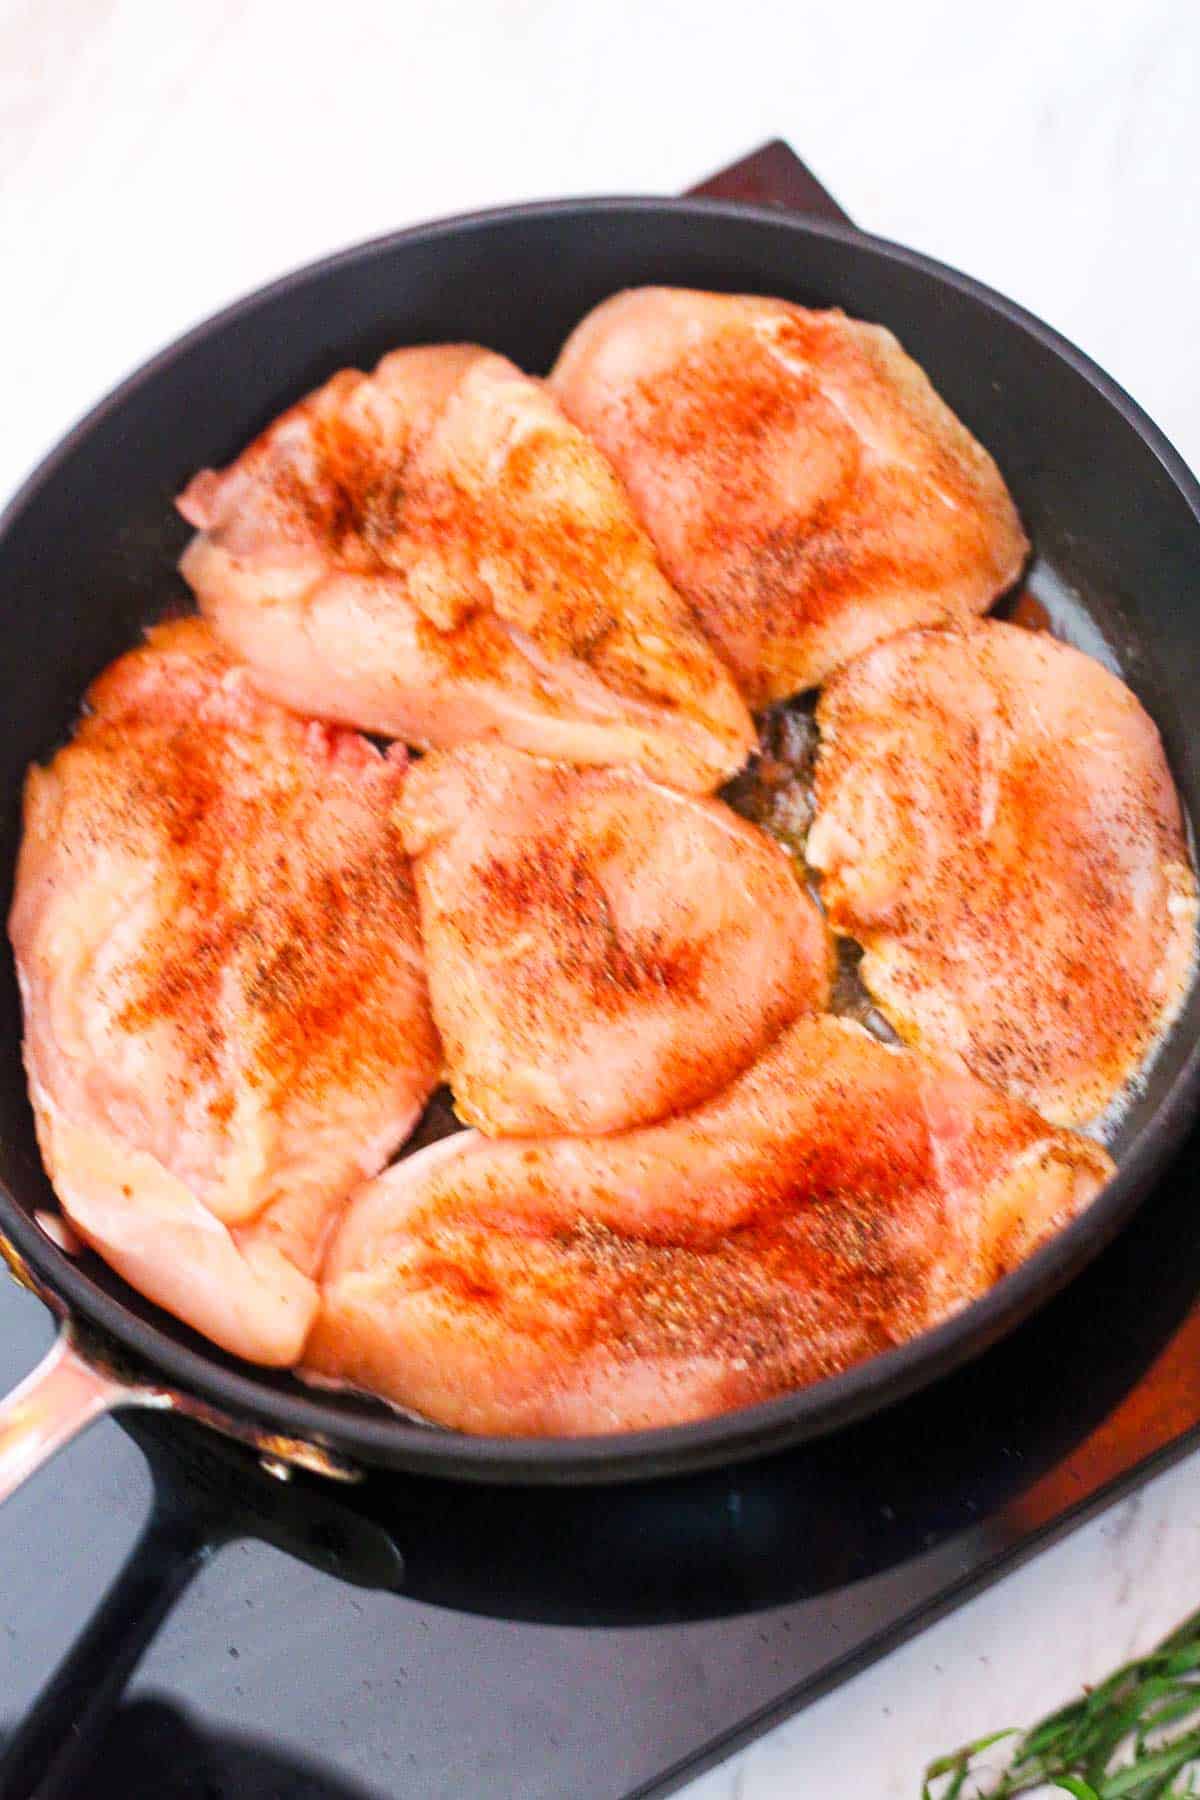 Searing chicken in butter on the skillet.